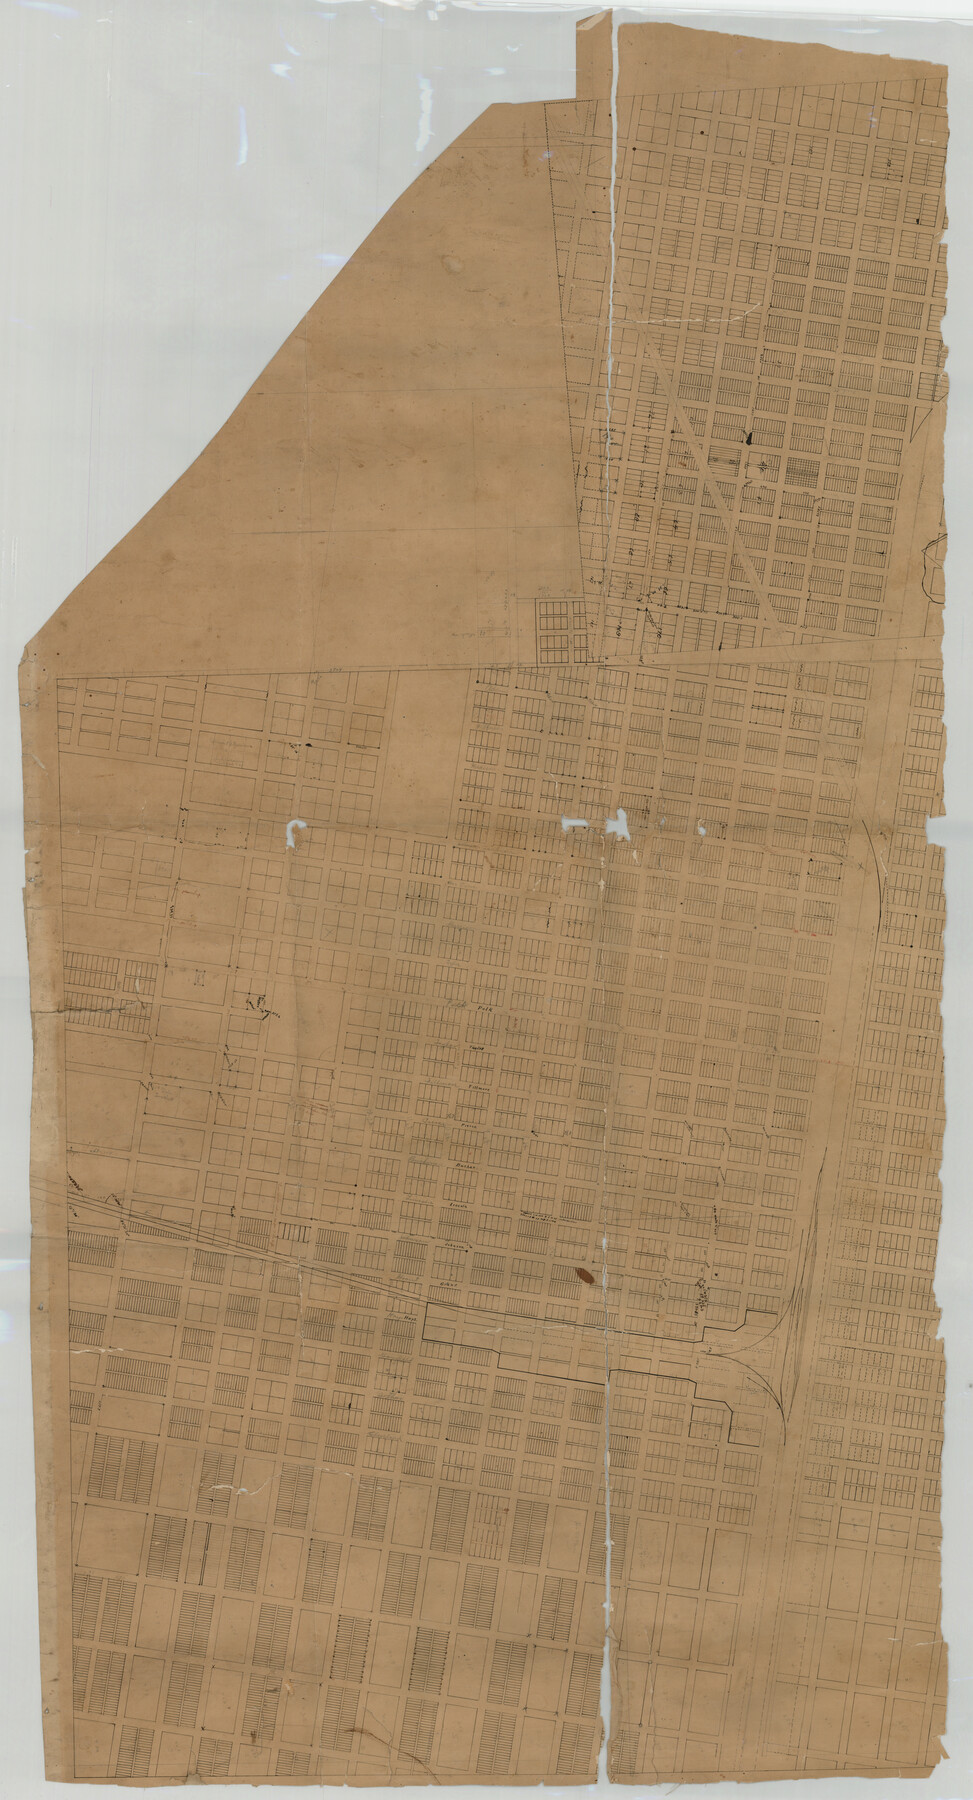 92990, [Sketch showing Blocks B5, B6 and G.&M. Block 5 north of Capitol Land], Twichell Survey Records